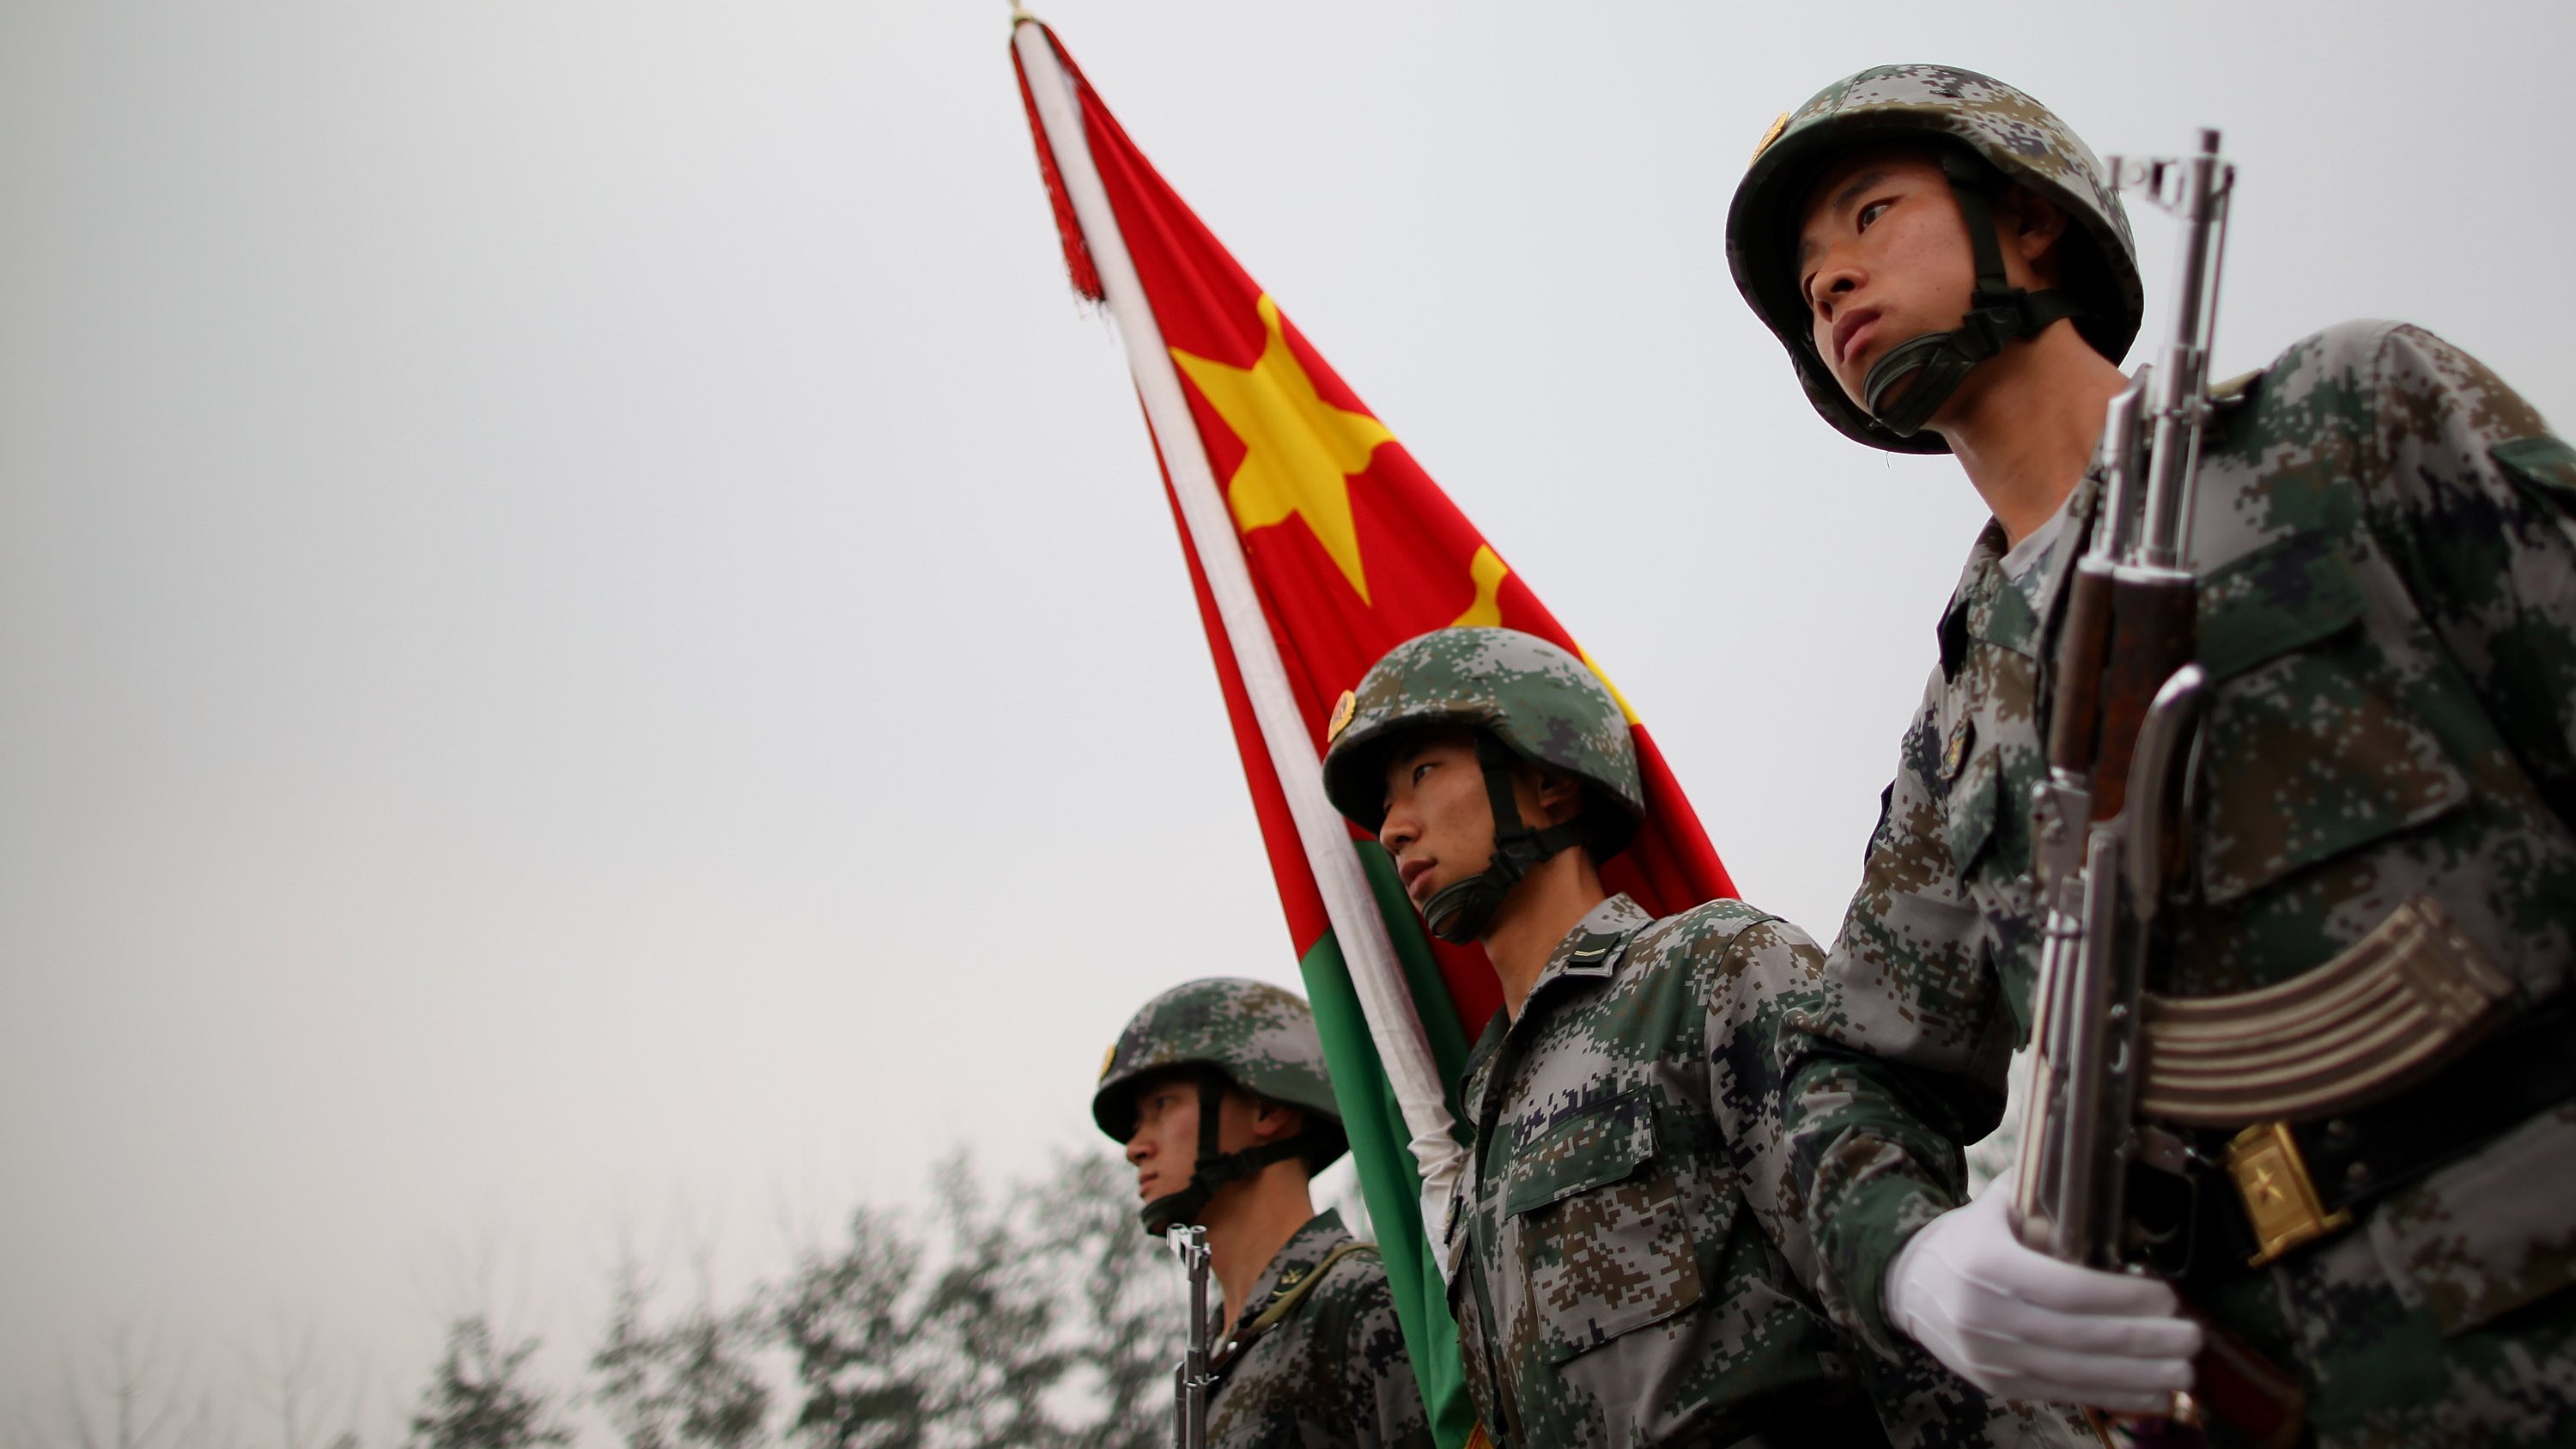 China Marks The 82nd Anniversary Of The Founding of PLA